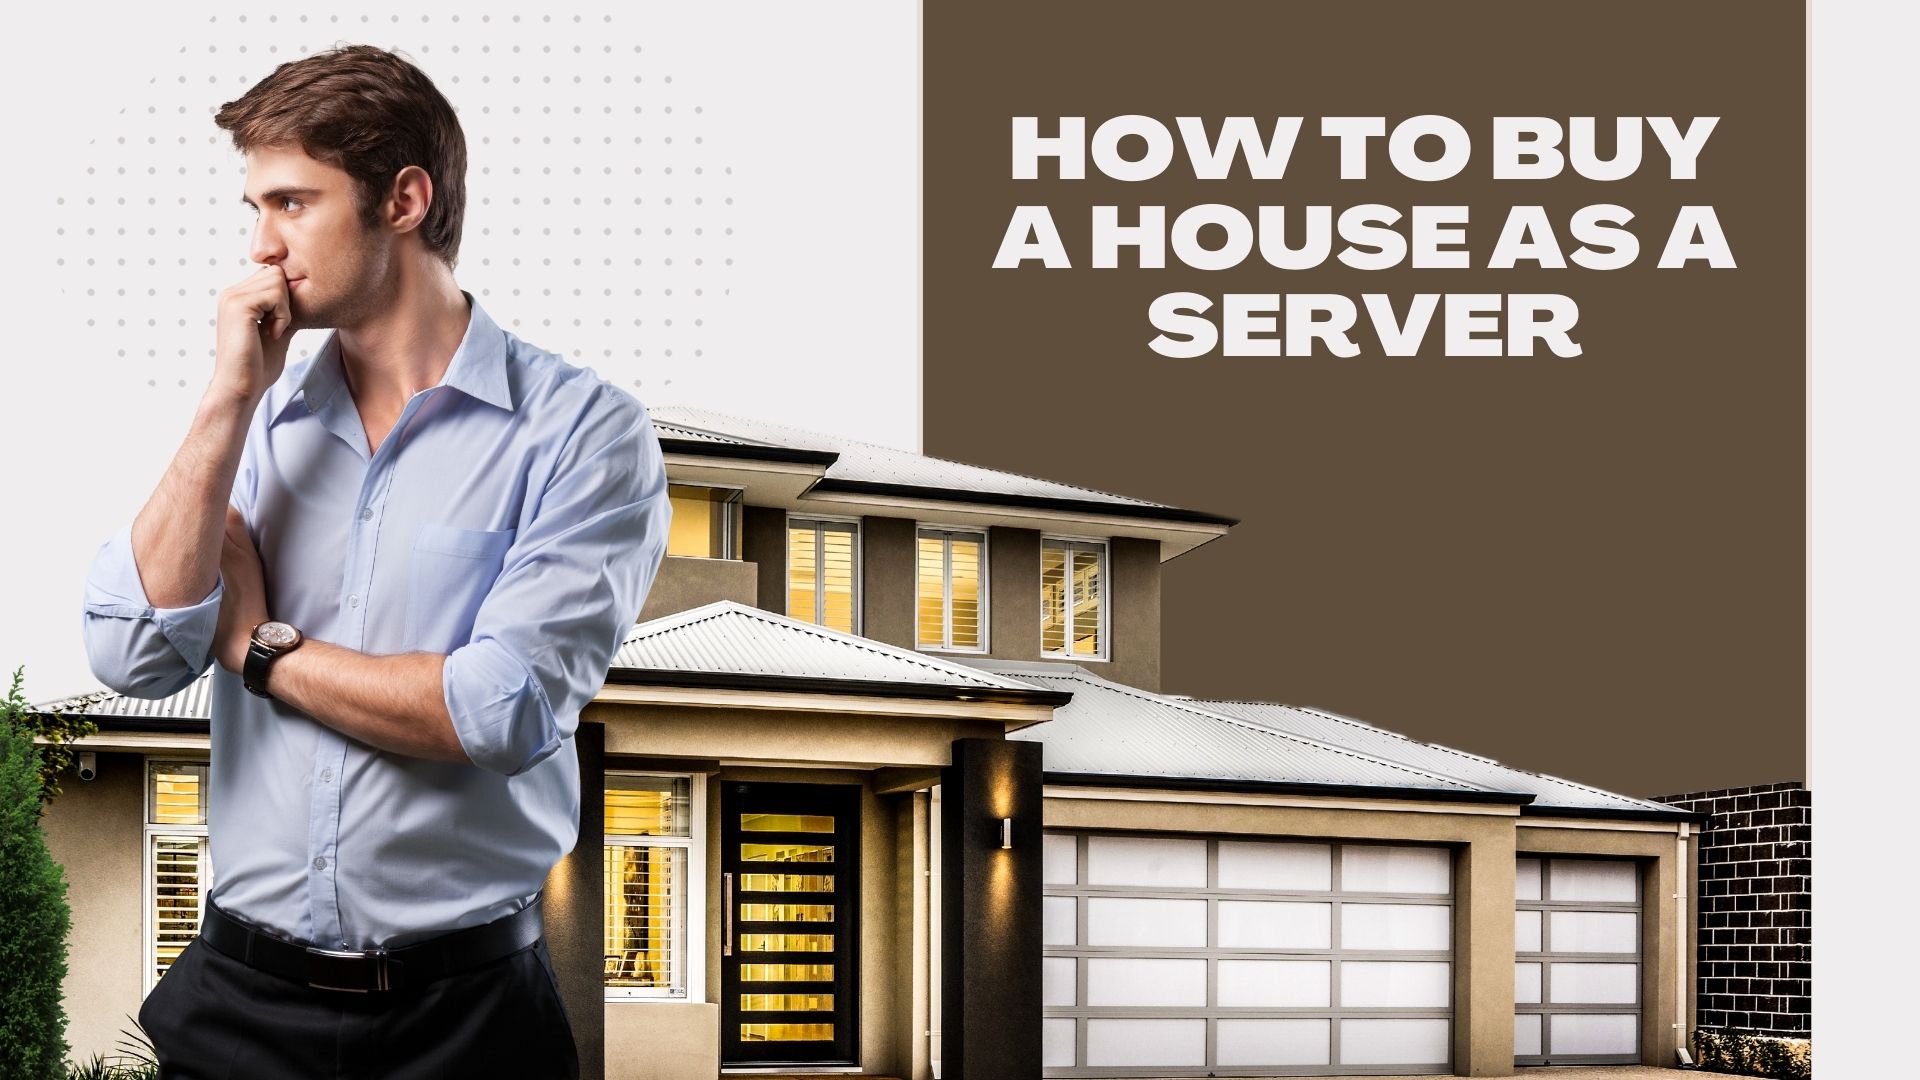 How to Buy a House As a Server